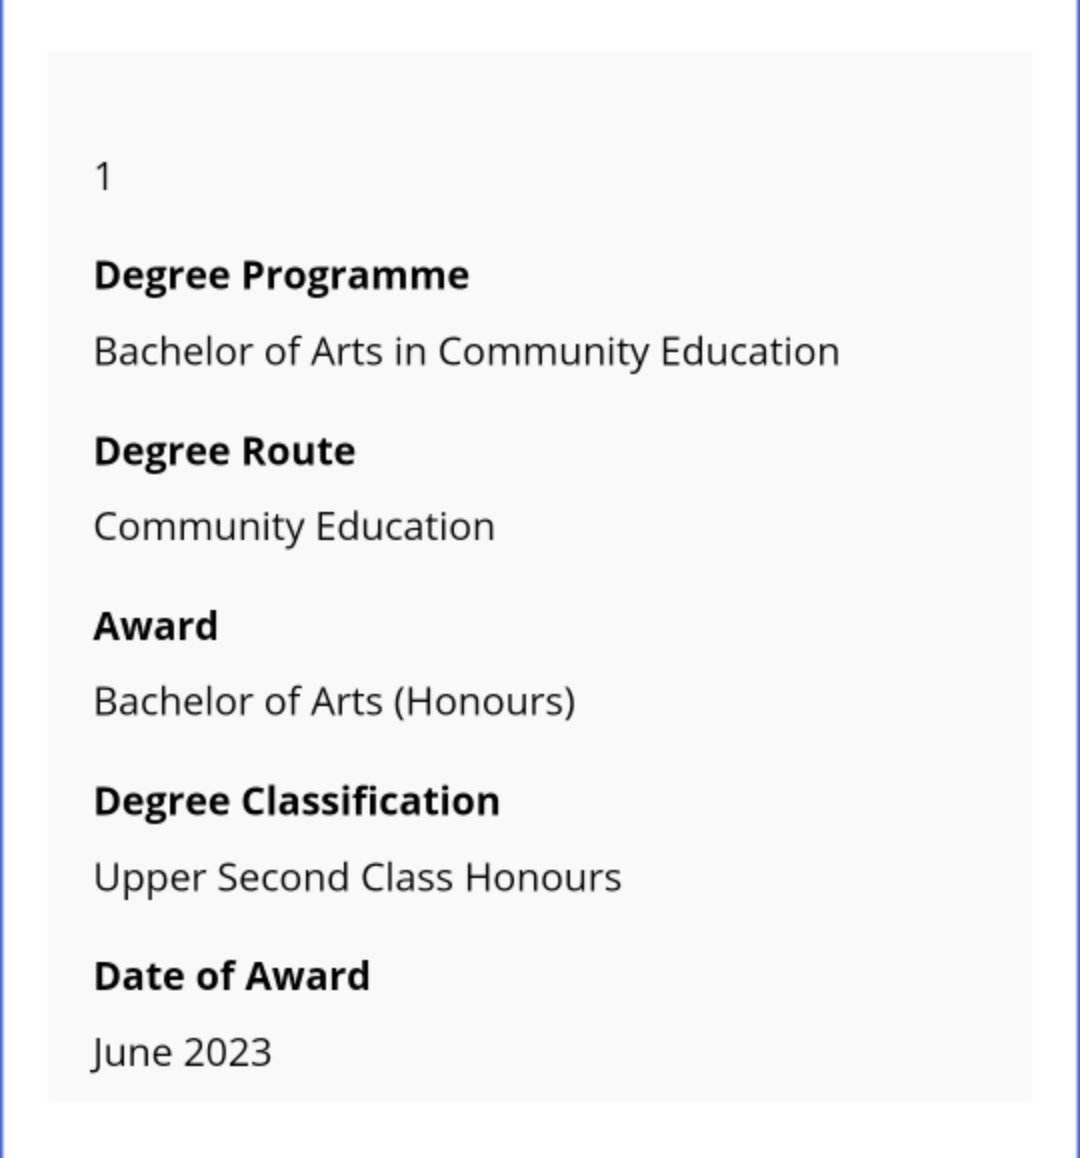 So happy to be graduating with a 2:1 in #communityeducation 👩‍🎓

Looking forward to celebrating with my family and friends at the end of the month ✨